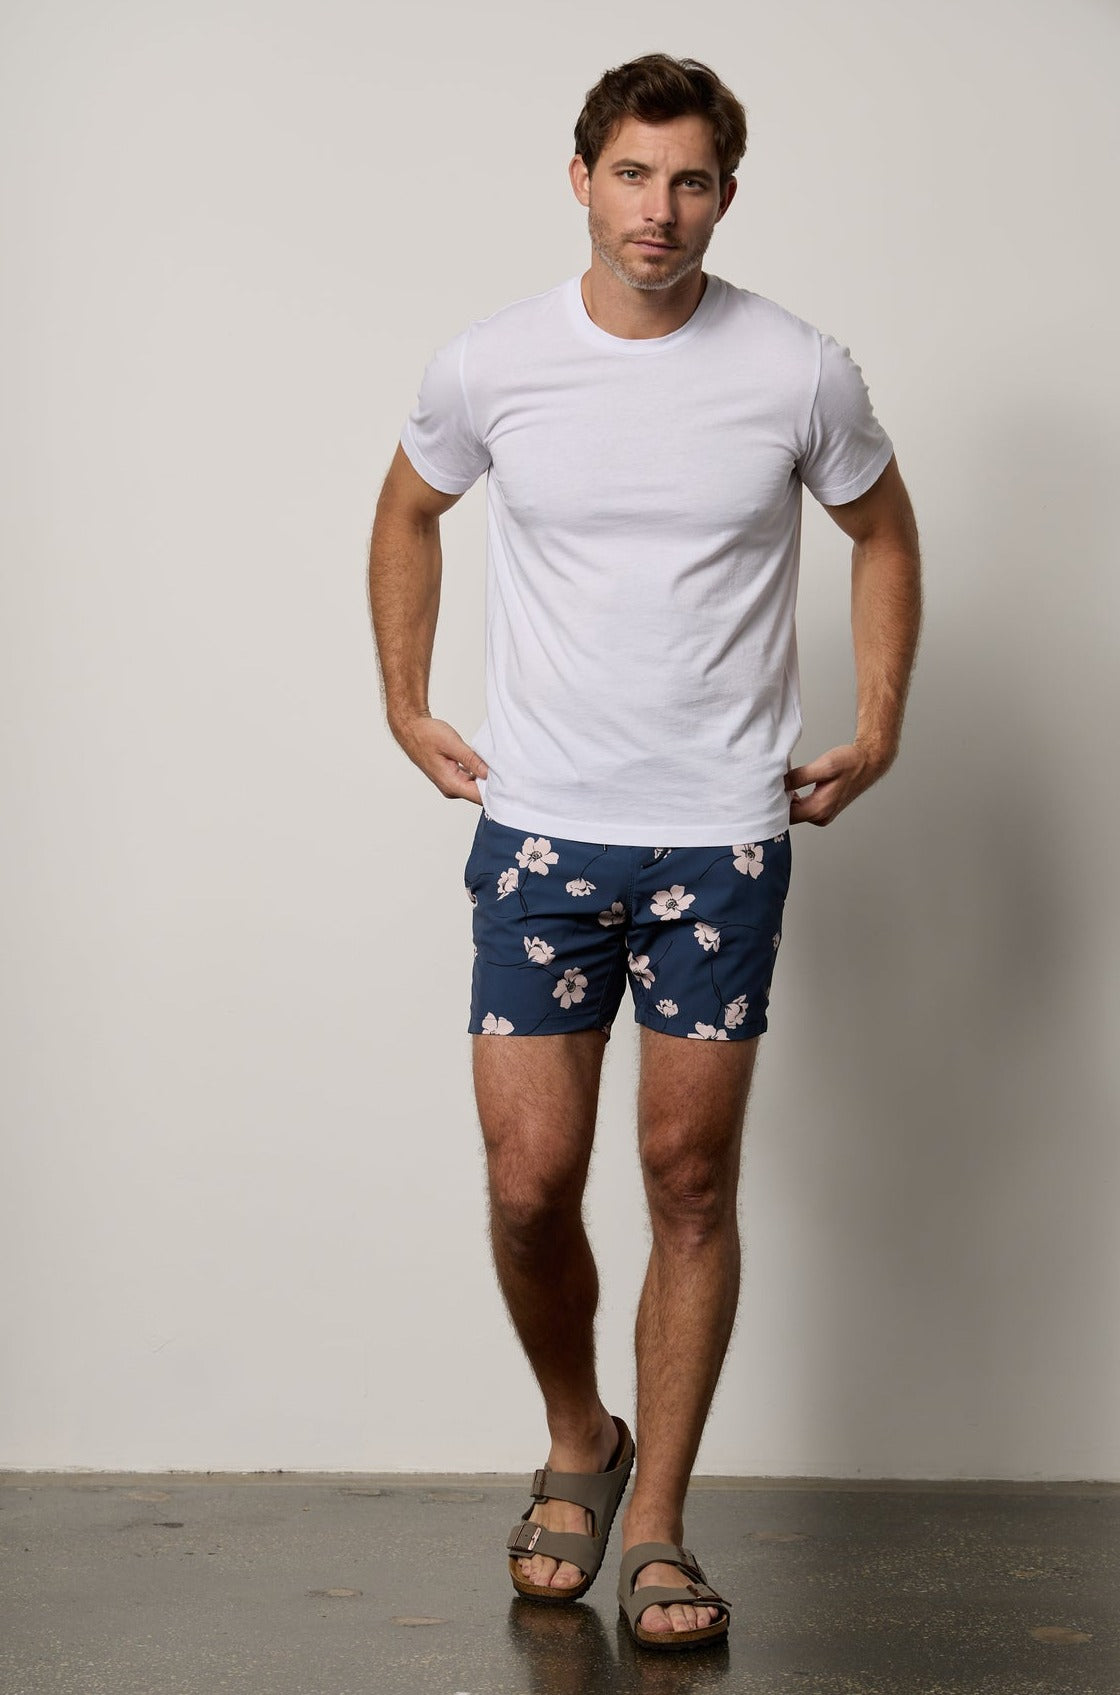   A man wearing a Velvet by Graham & Spencer RICARDO PRINTED SWIM SHORT and a t-shirt, standing in front of a white wall. 